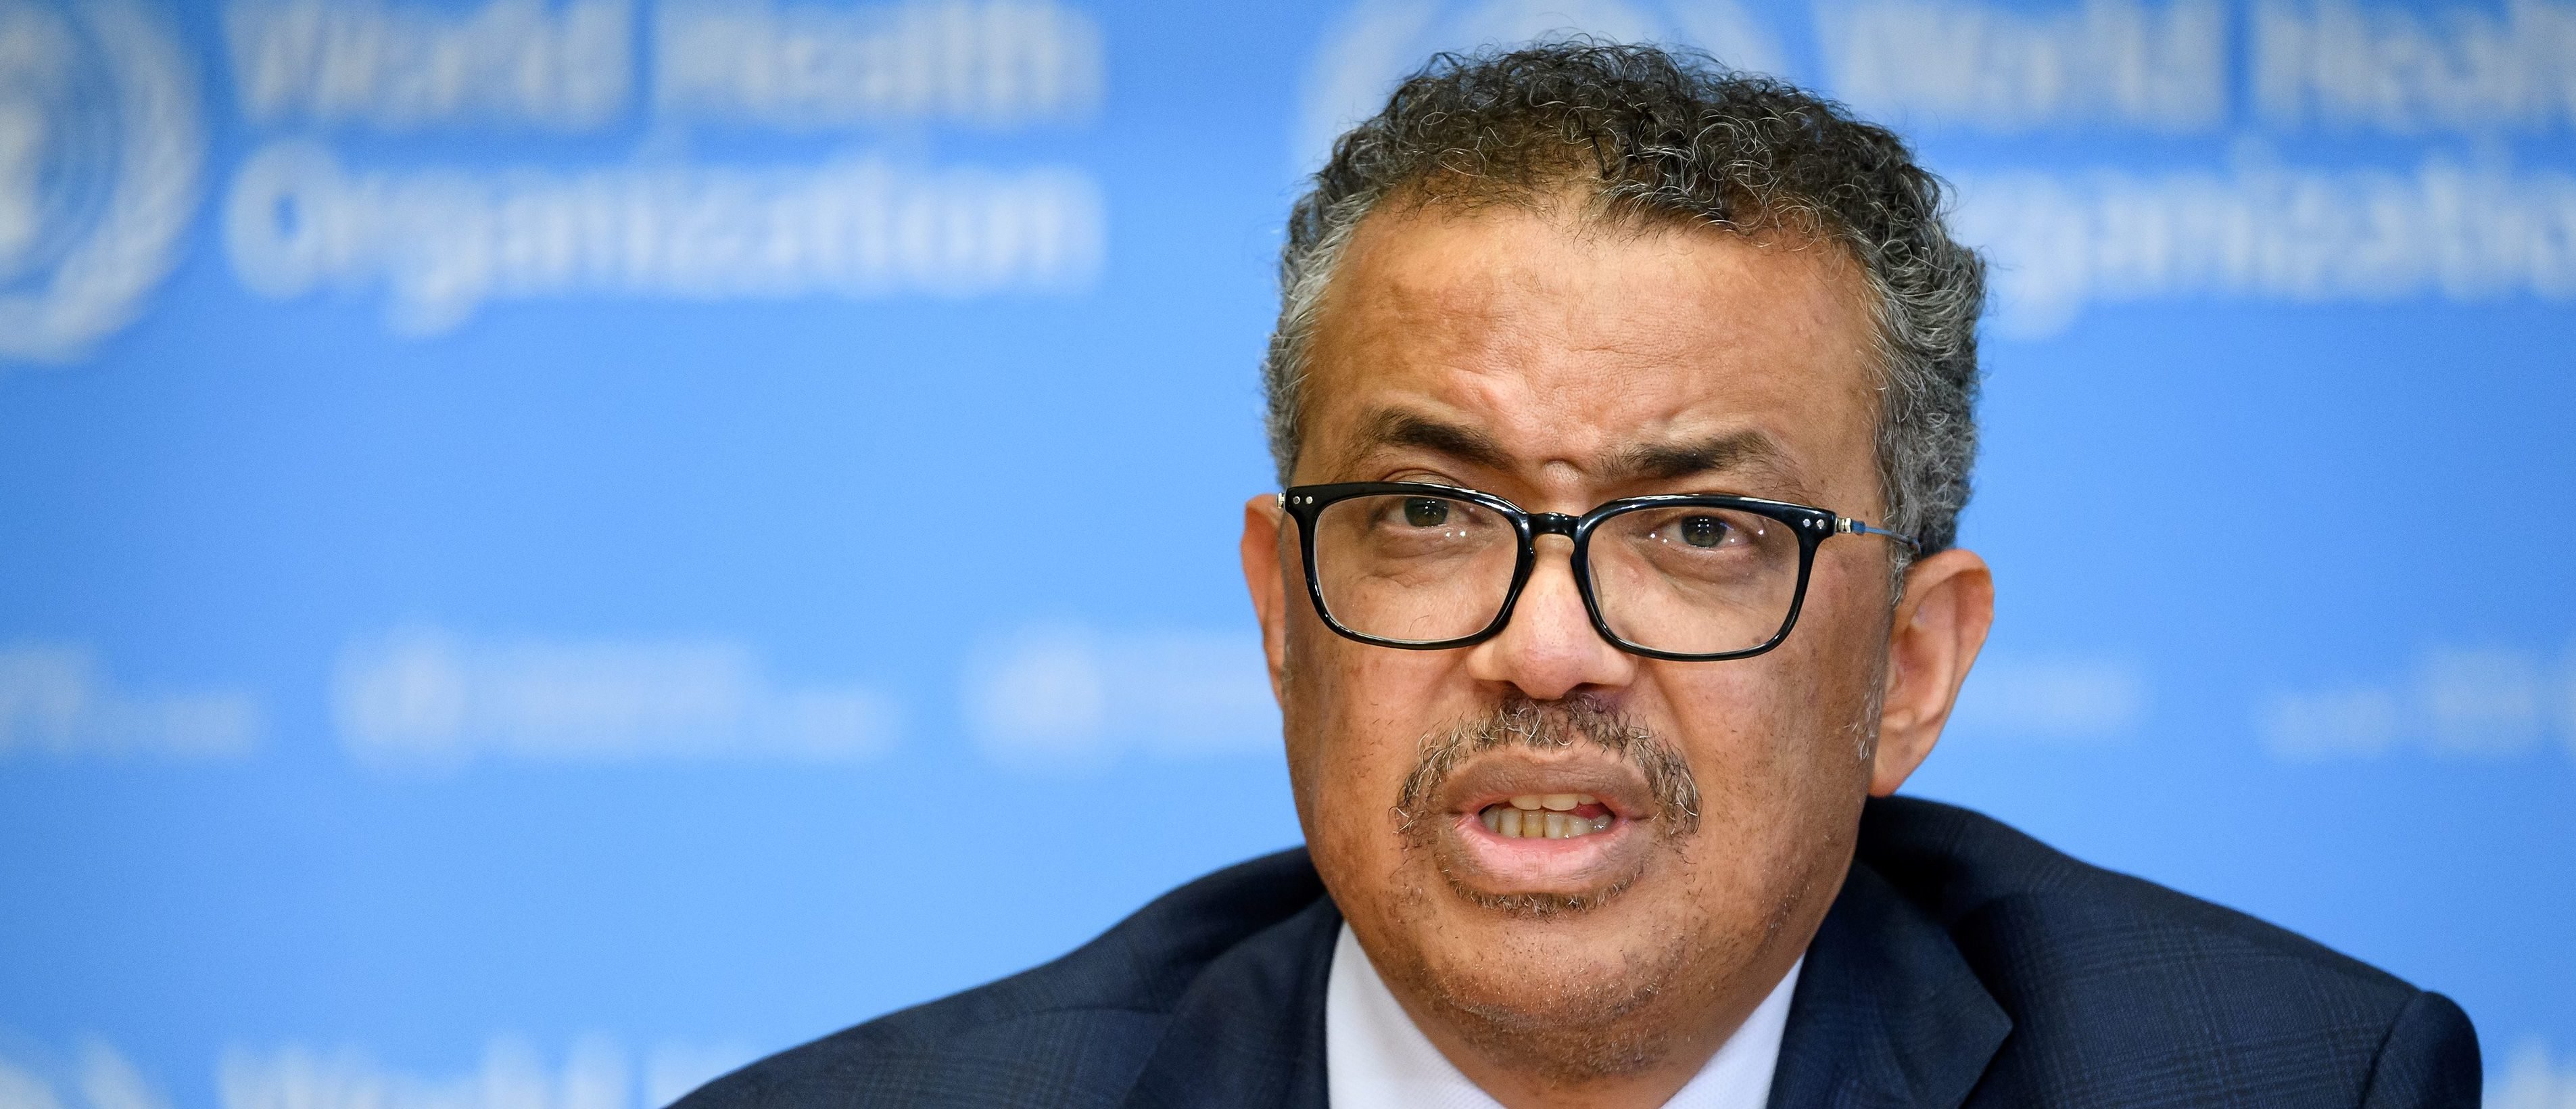 World Health Organization (WHO) Director-General Tedros Adhanom Ghebreyesus attends a daily press briefing on COVID-19 virus at the WHO headquaters on March 6, 2020, in Geneva. (FABRICE COFFRINI/AFP via Getty Images)